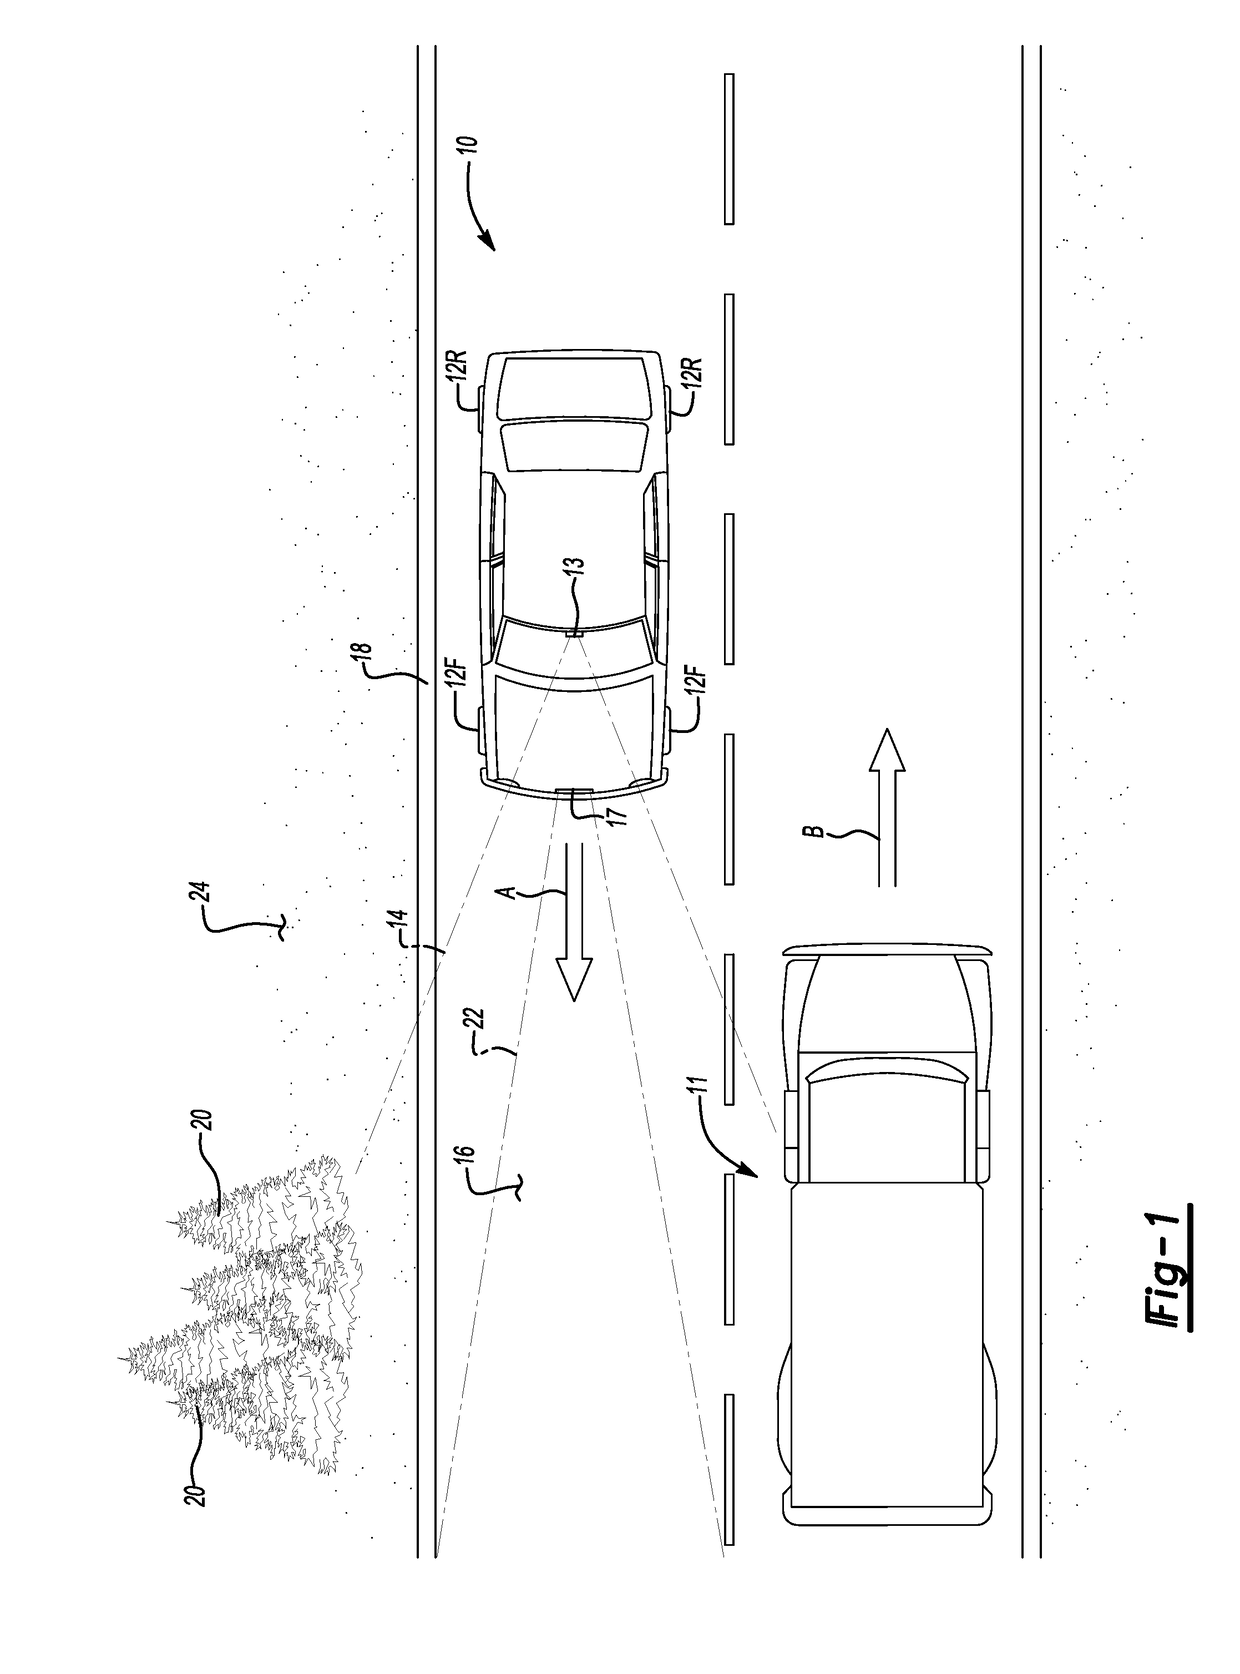 Apparatus and method for optimizing a vehicle collision preparation response